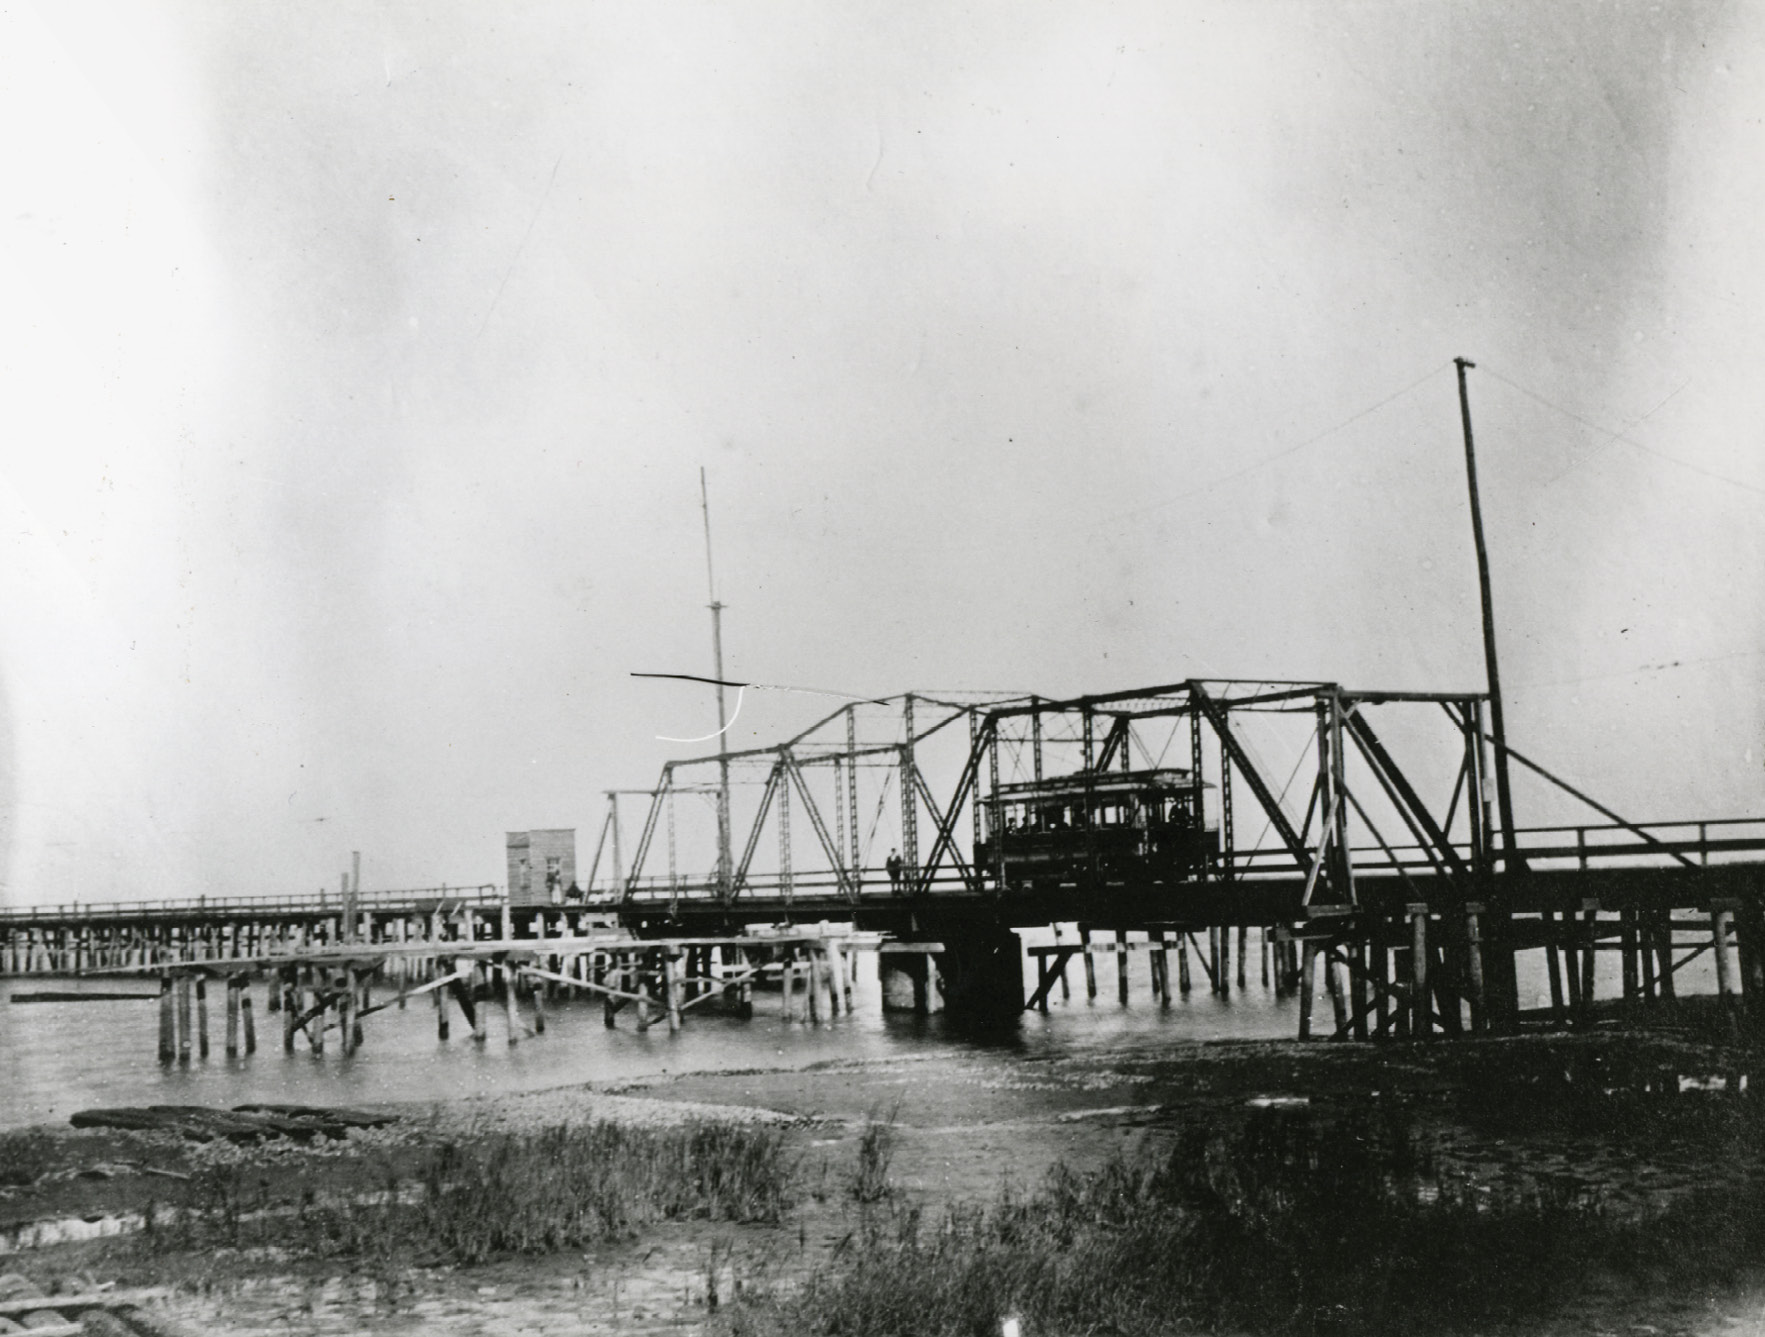 The Cove Inlet trolley bridge between the Old Village in Mount Pleasant and Station 9 on the island